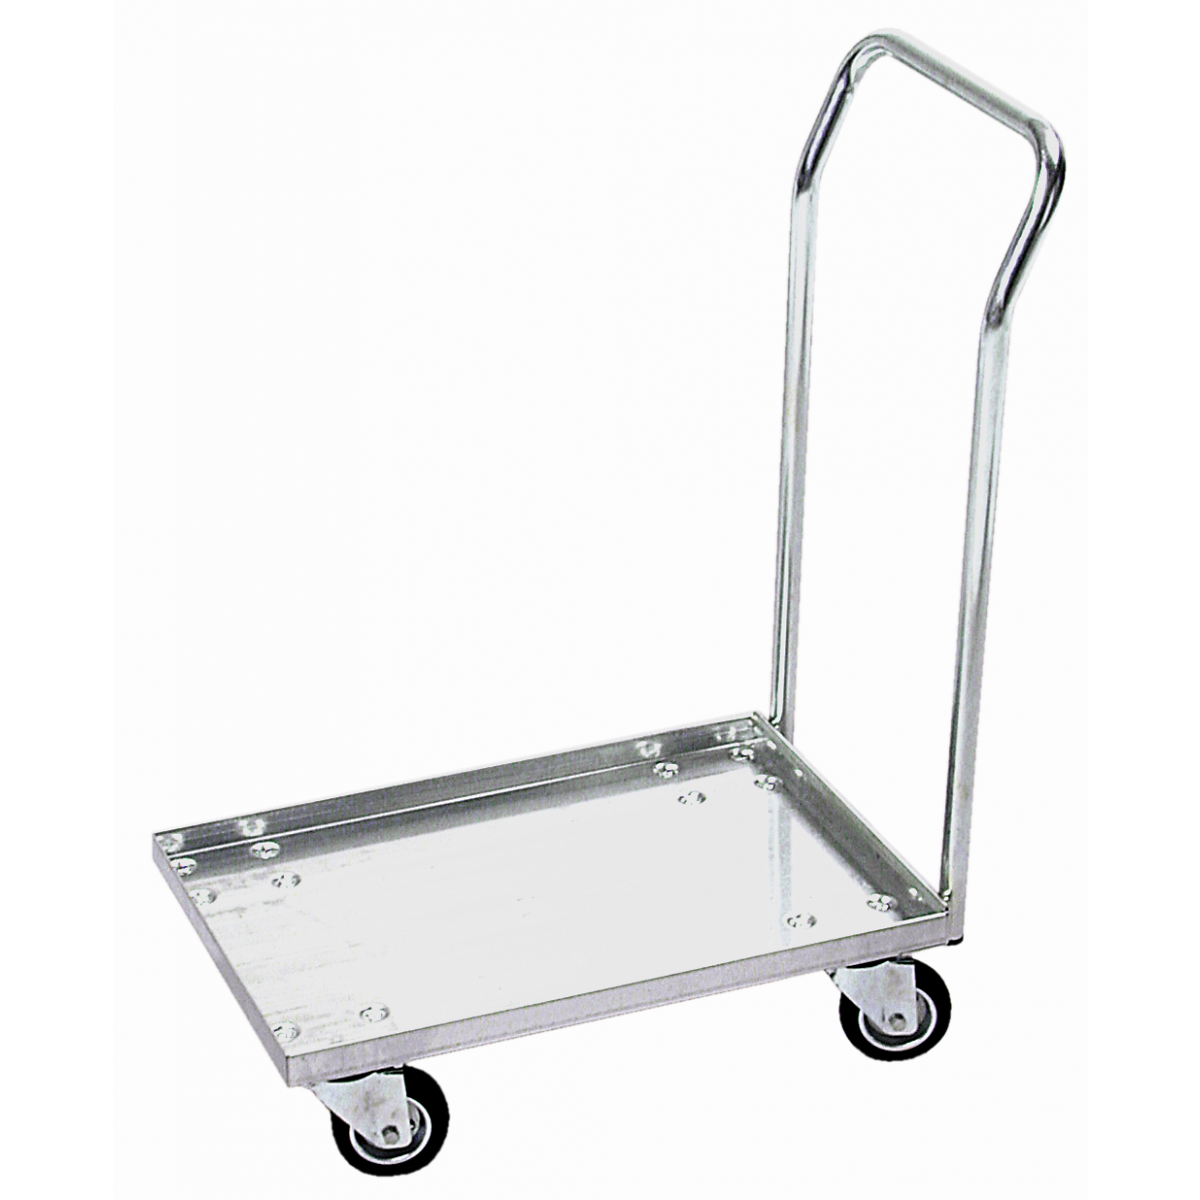 Designation:ESD transport cart with handle for storage container, Dimension (WxD):610 x 410 mm